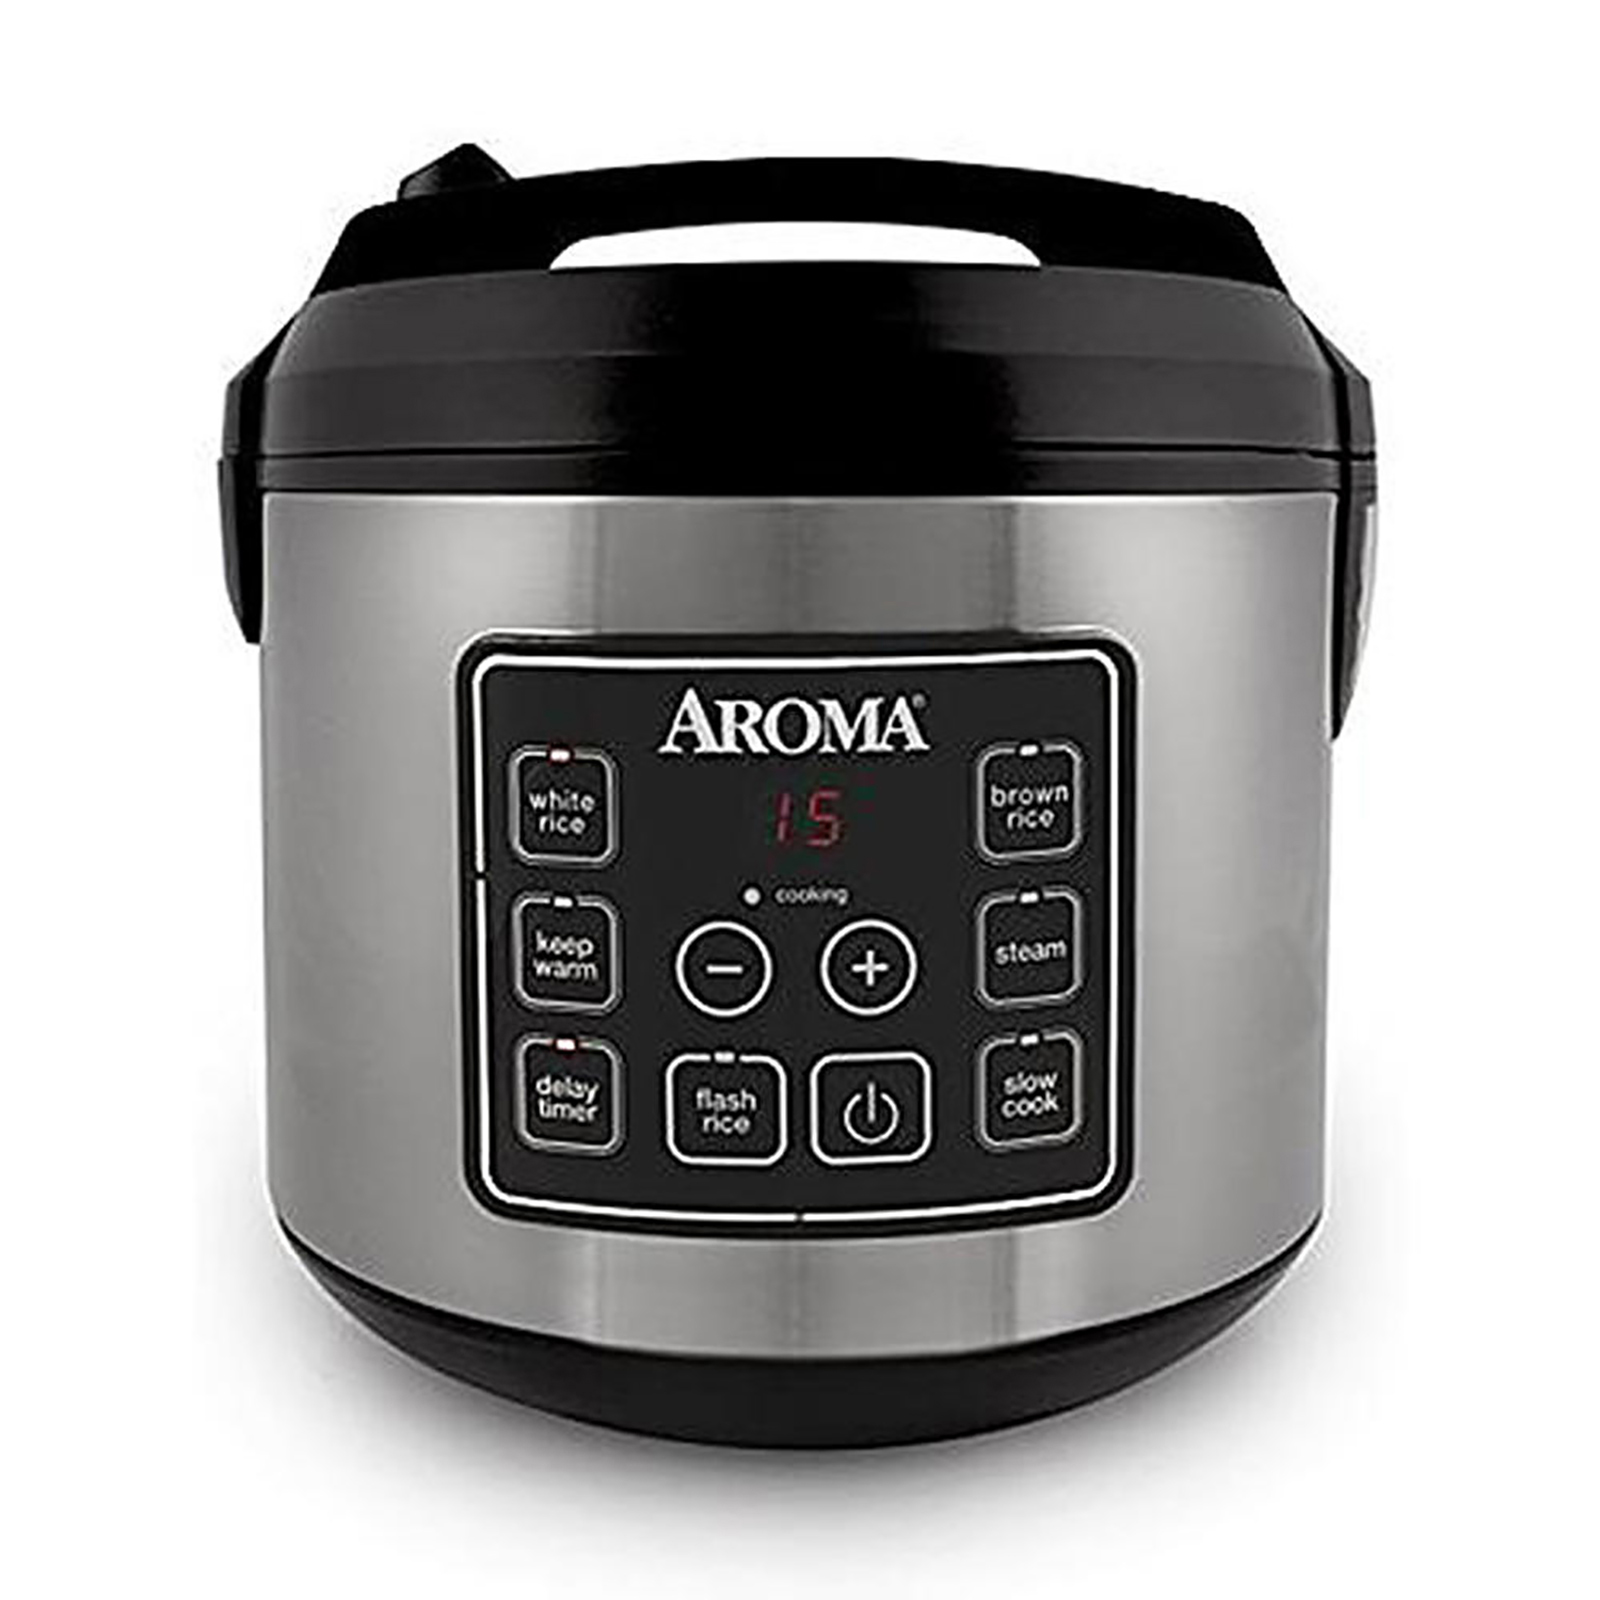 Aroma Professional ARC-1230B Grain, Oatmeal,Slow Cooker, Saute, Steam,  Timer, 10 Cup Uncooked/20 Cup Cooked, Black